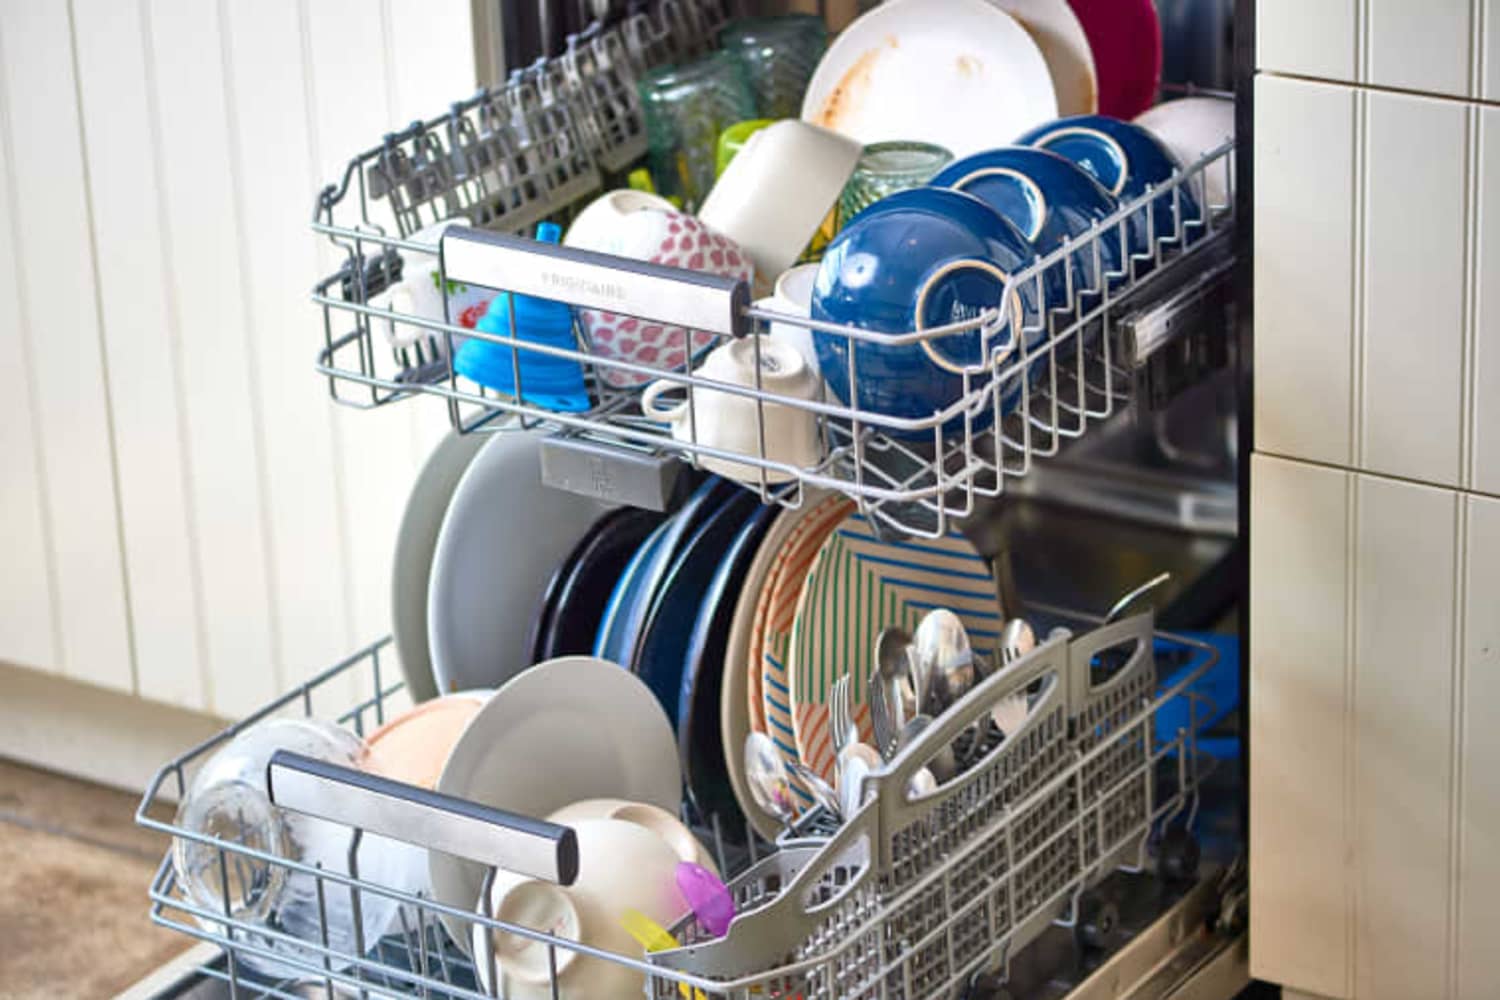 How to Disinfect Your Dishwasher in 4 Easy Steps - Signature Place  Apartments